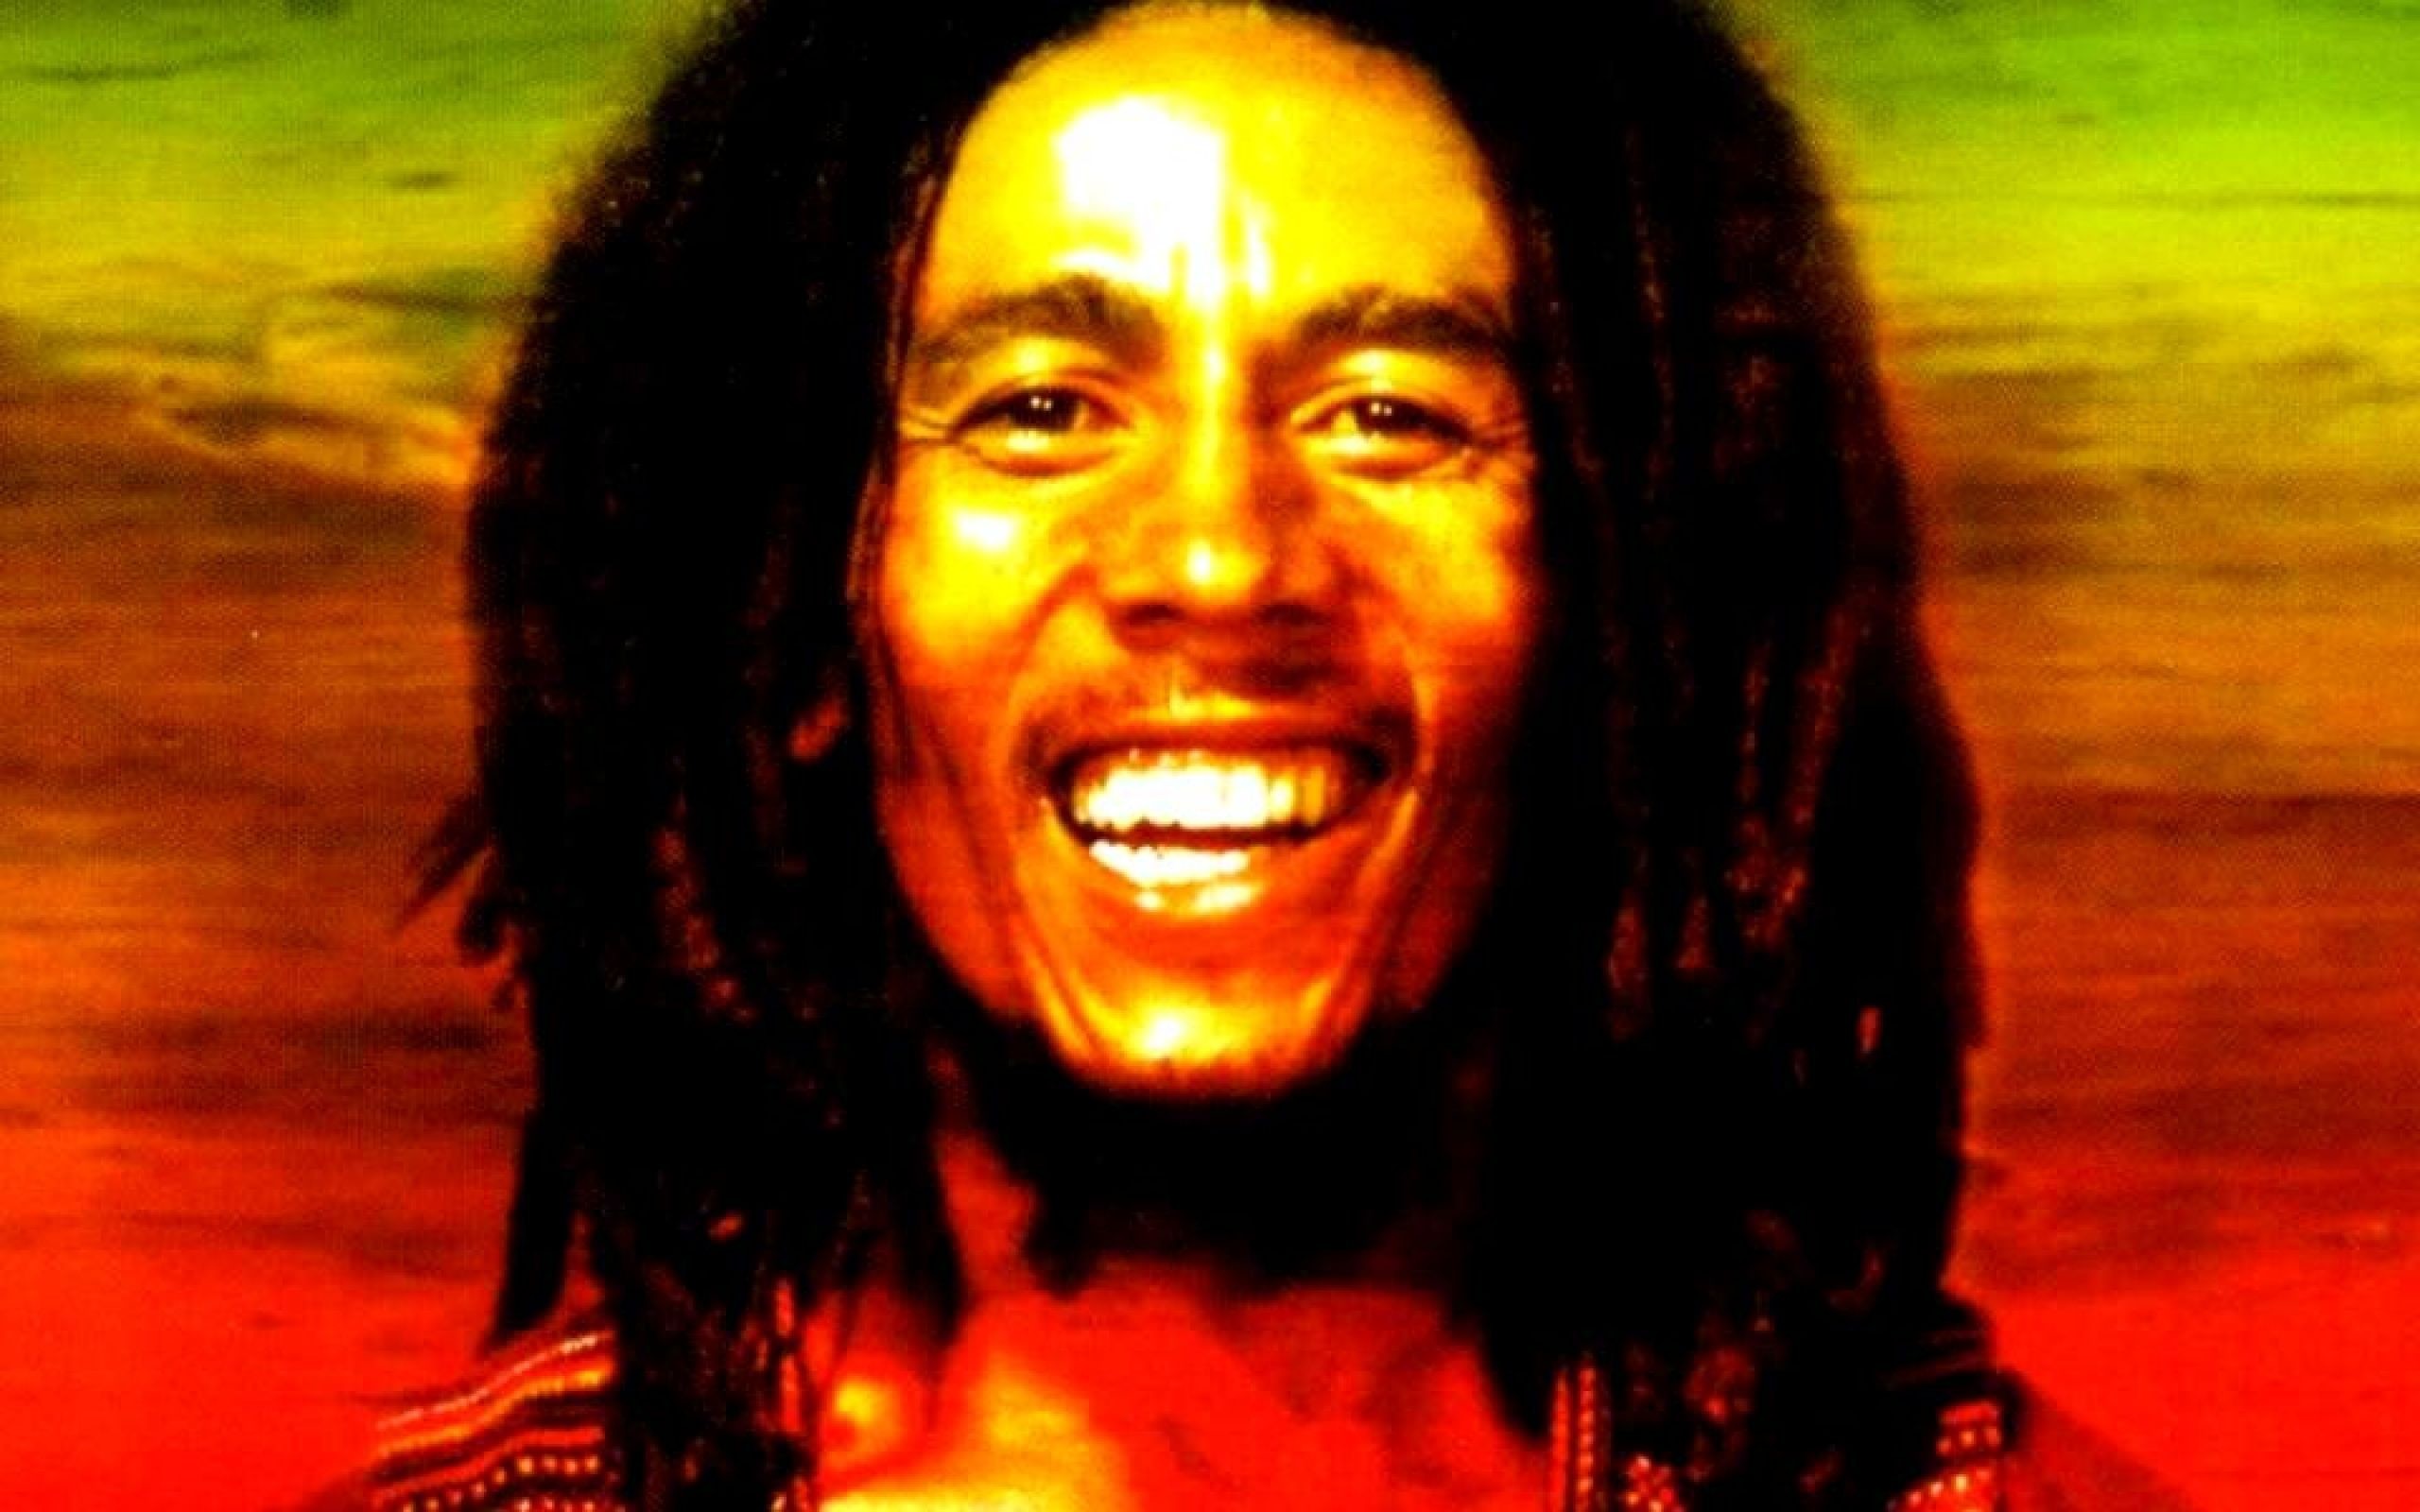 2560x1600 Bob Marley Wallpaper HD Best Collection Free Download | Download Wallpaper  | Pinterest | Bob marley and Wallpaper